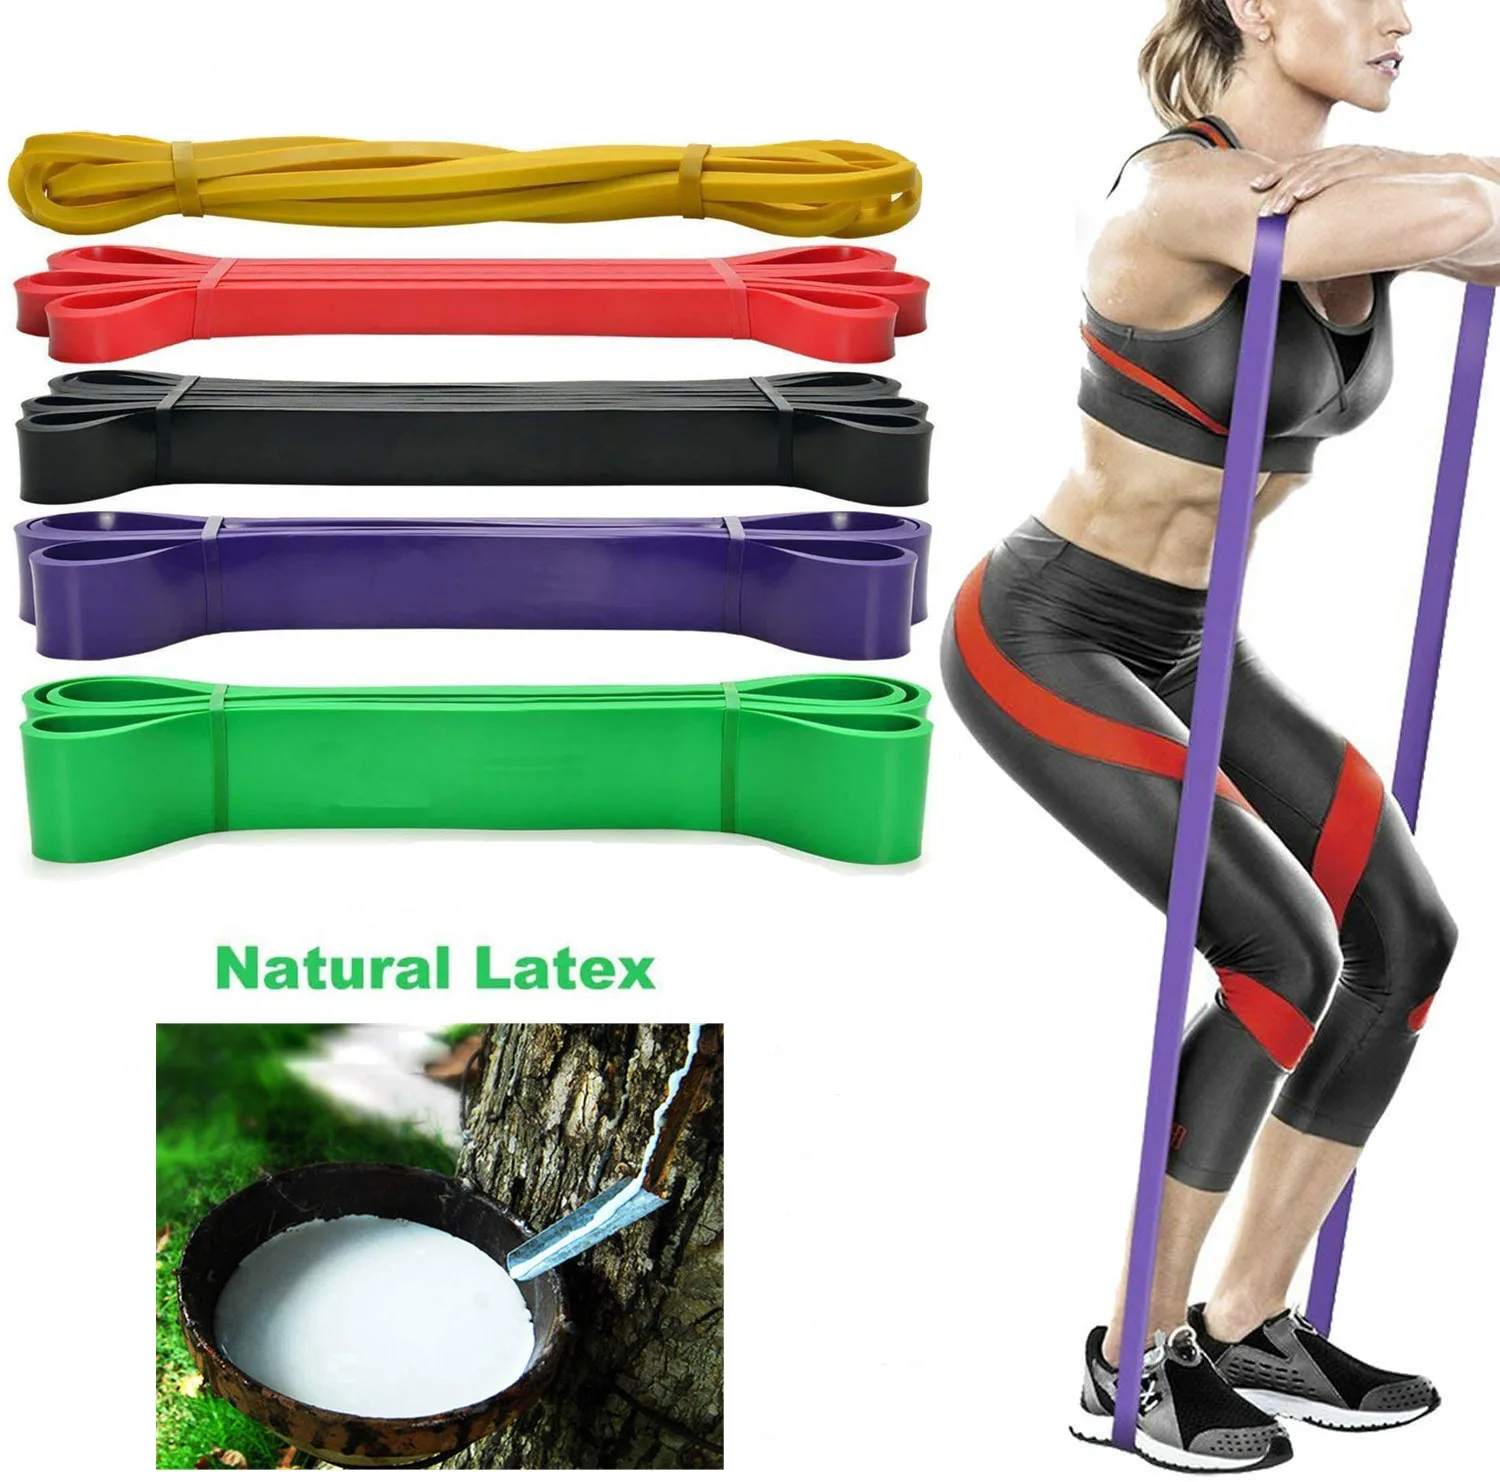 Heavy Duty Pull Up Assist Bands Resistance Band Mobility Powerlifting Band Safe 